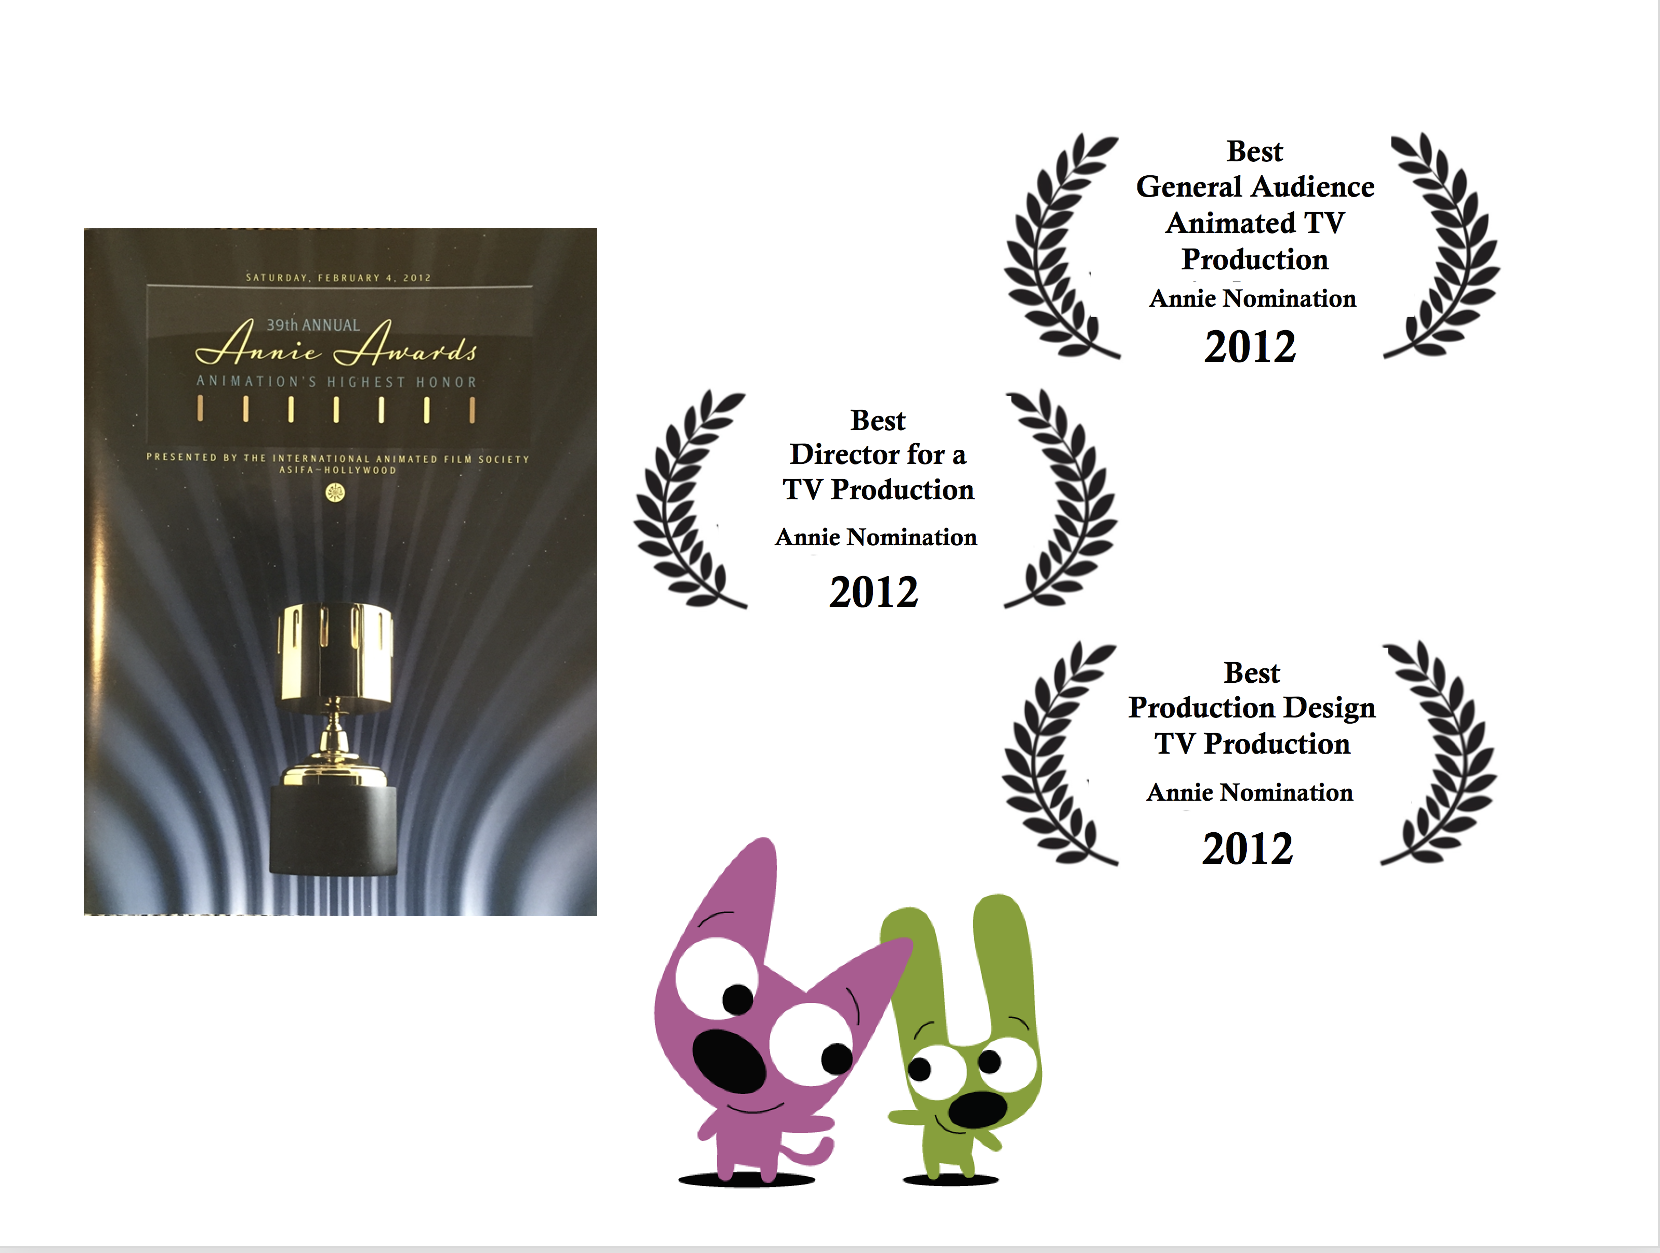   hoops&amp;yoyo Ruin Christmas was nominated for a number of industry awards, including three Annie Award nominations.  